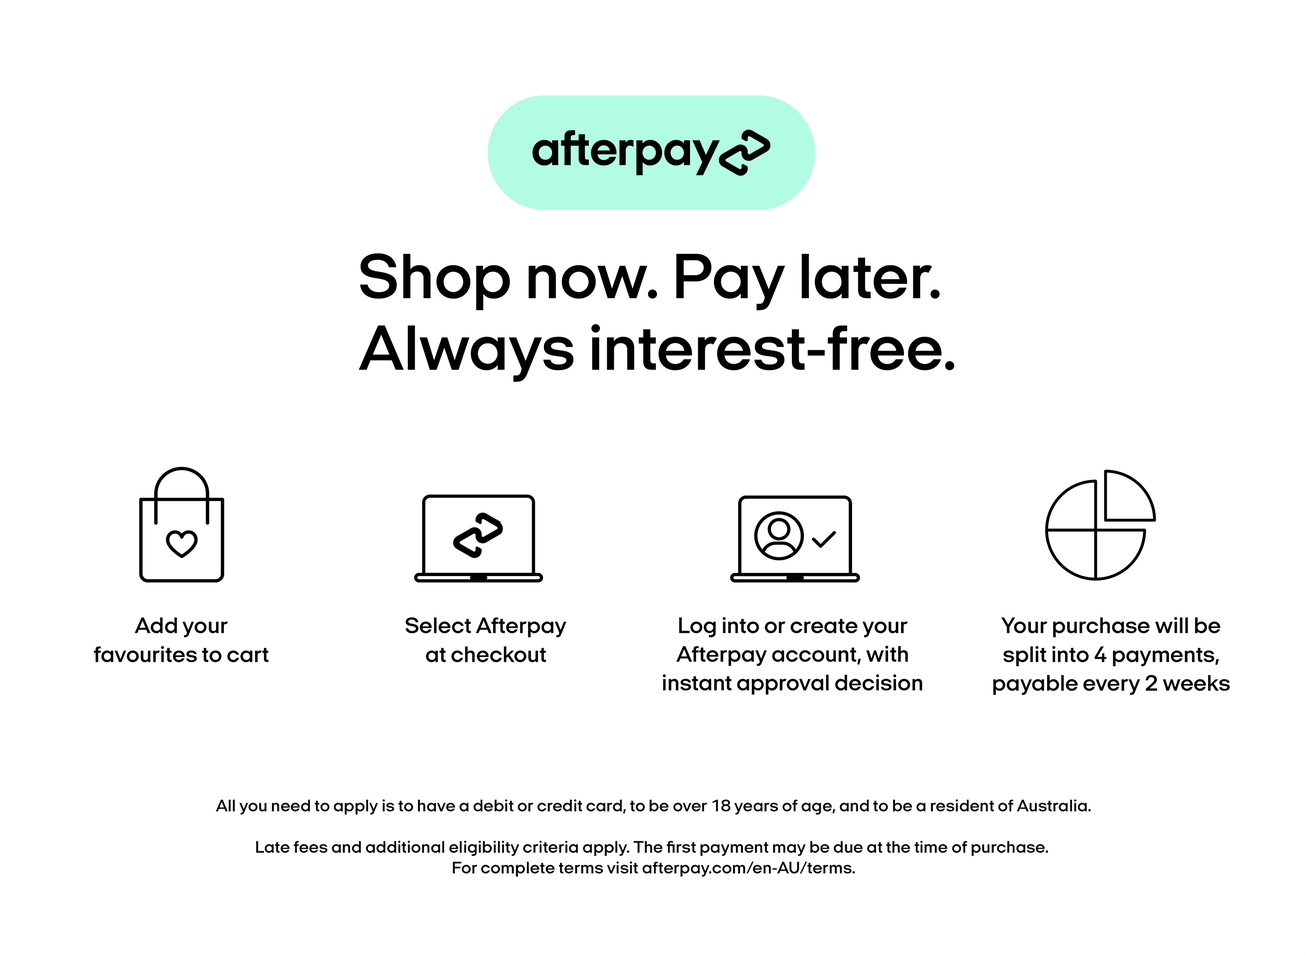 Modal Afterpay